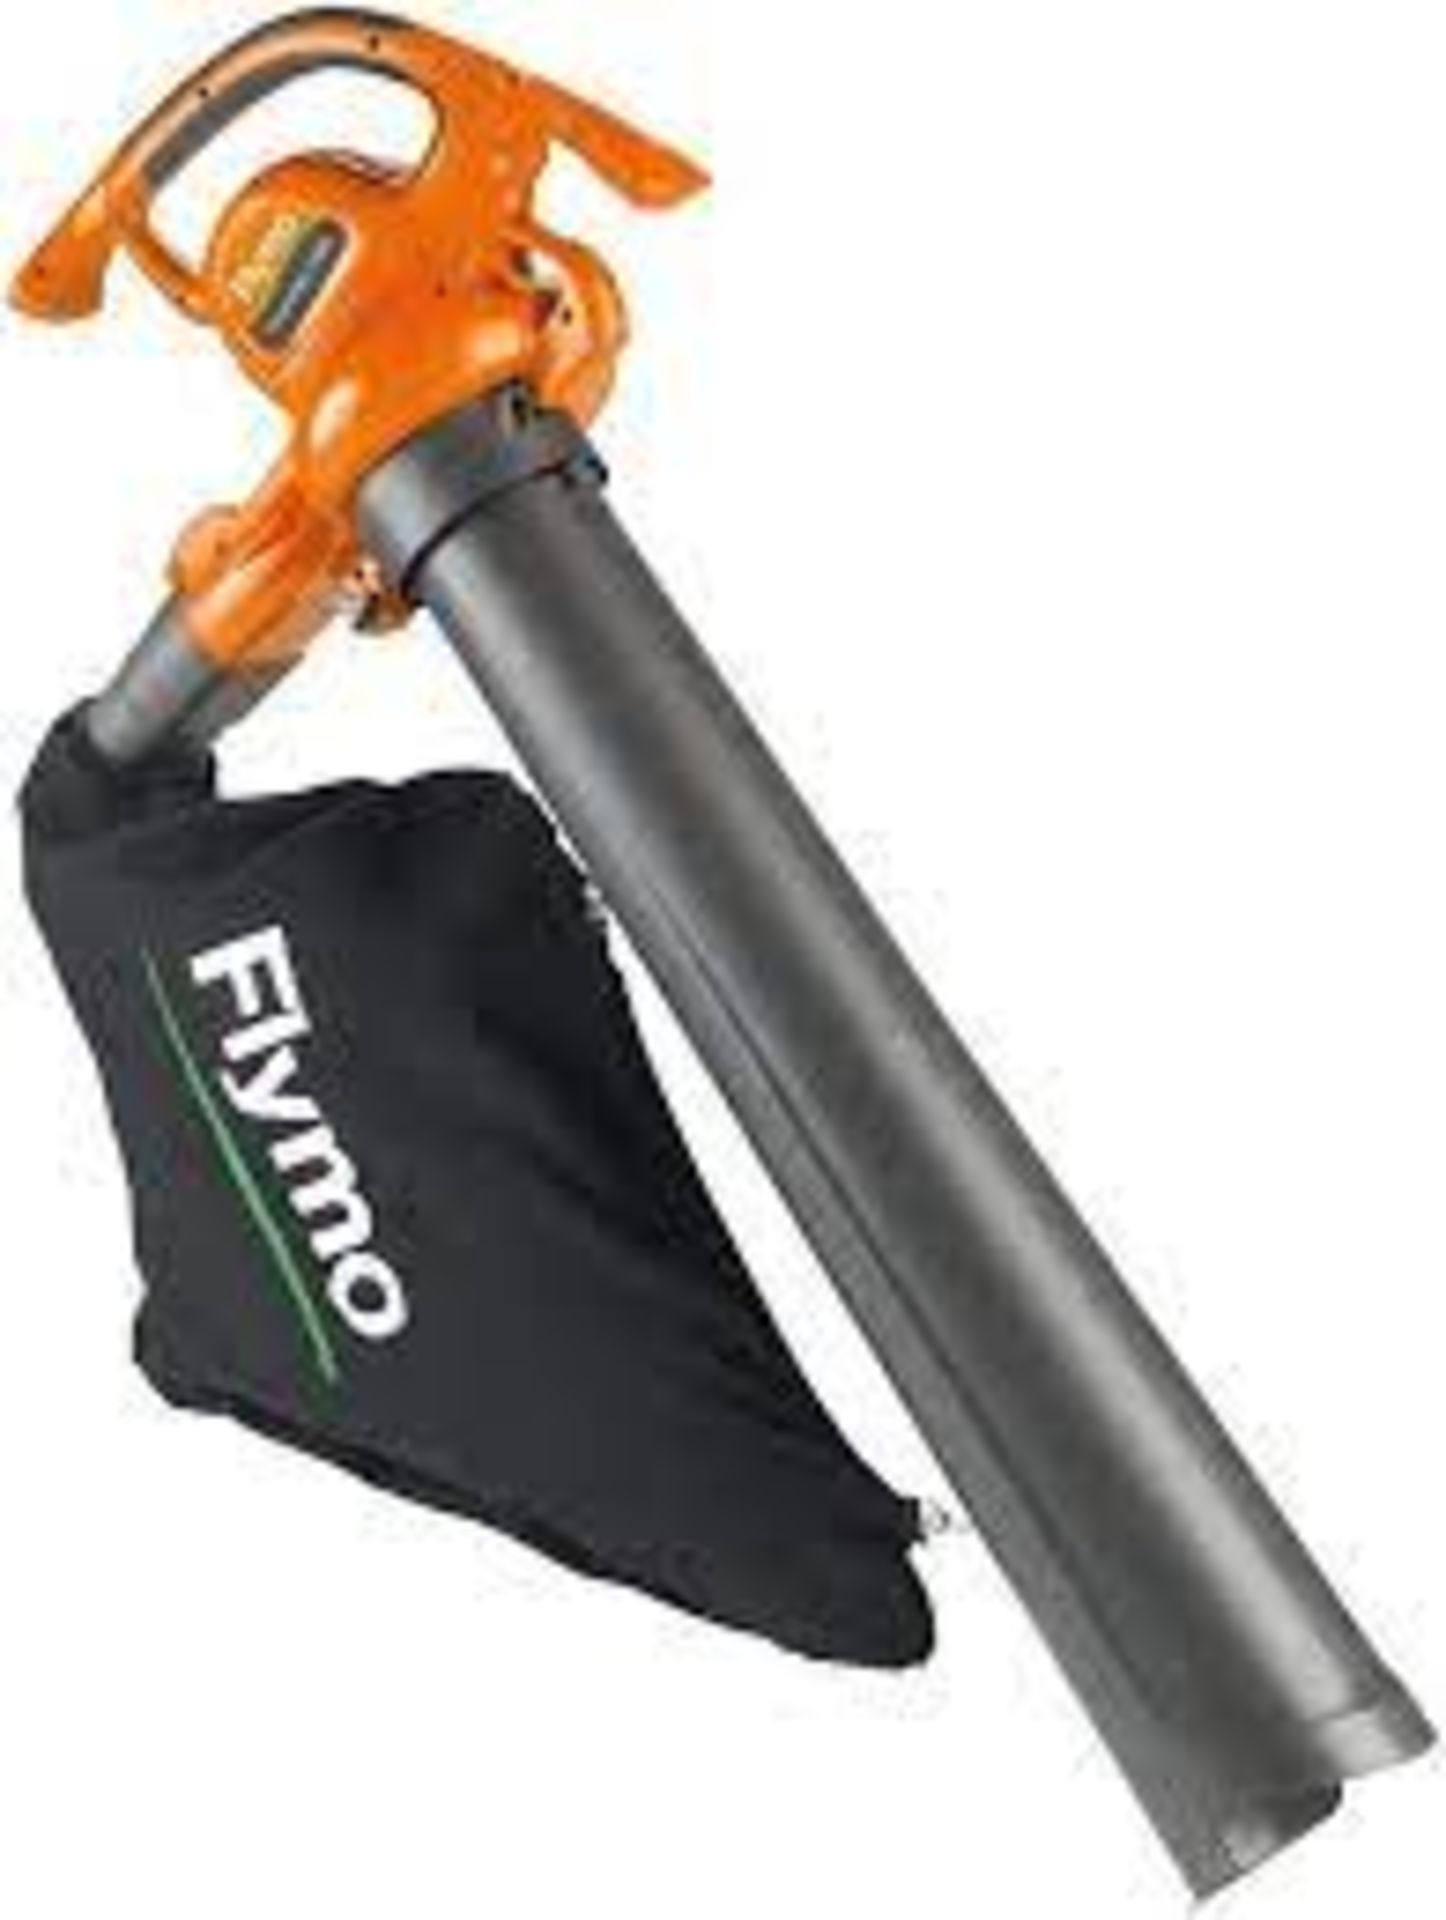 Flymo PowerVac 3000 3-in-1 Electric Garden Blower Vac, 3000 W. - P3. Powerful, easy to use garden